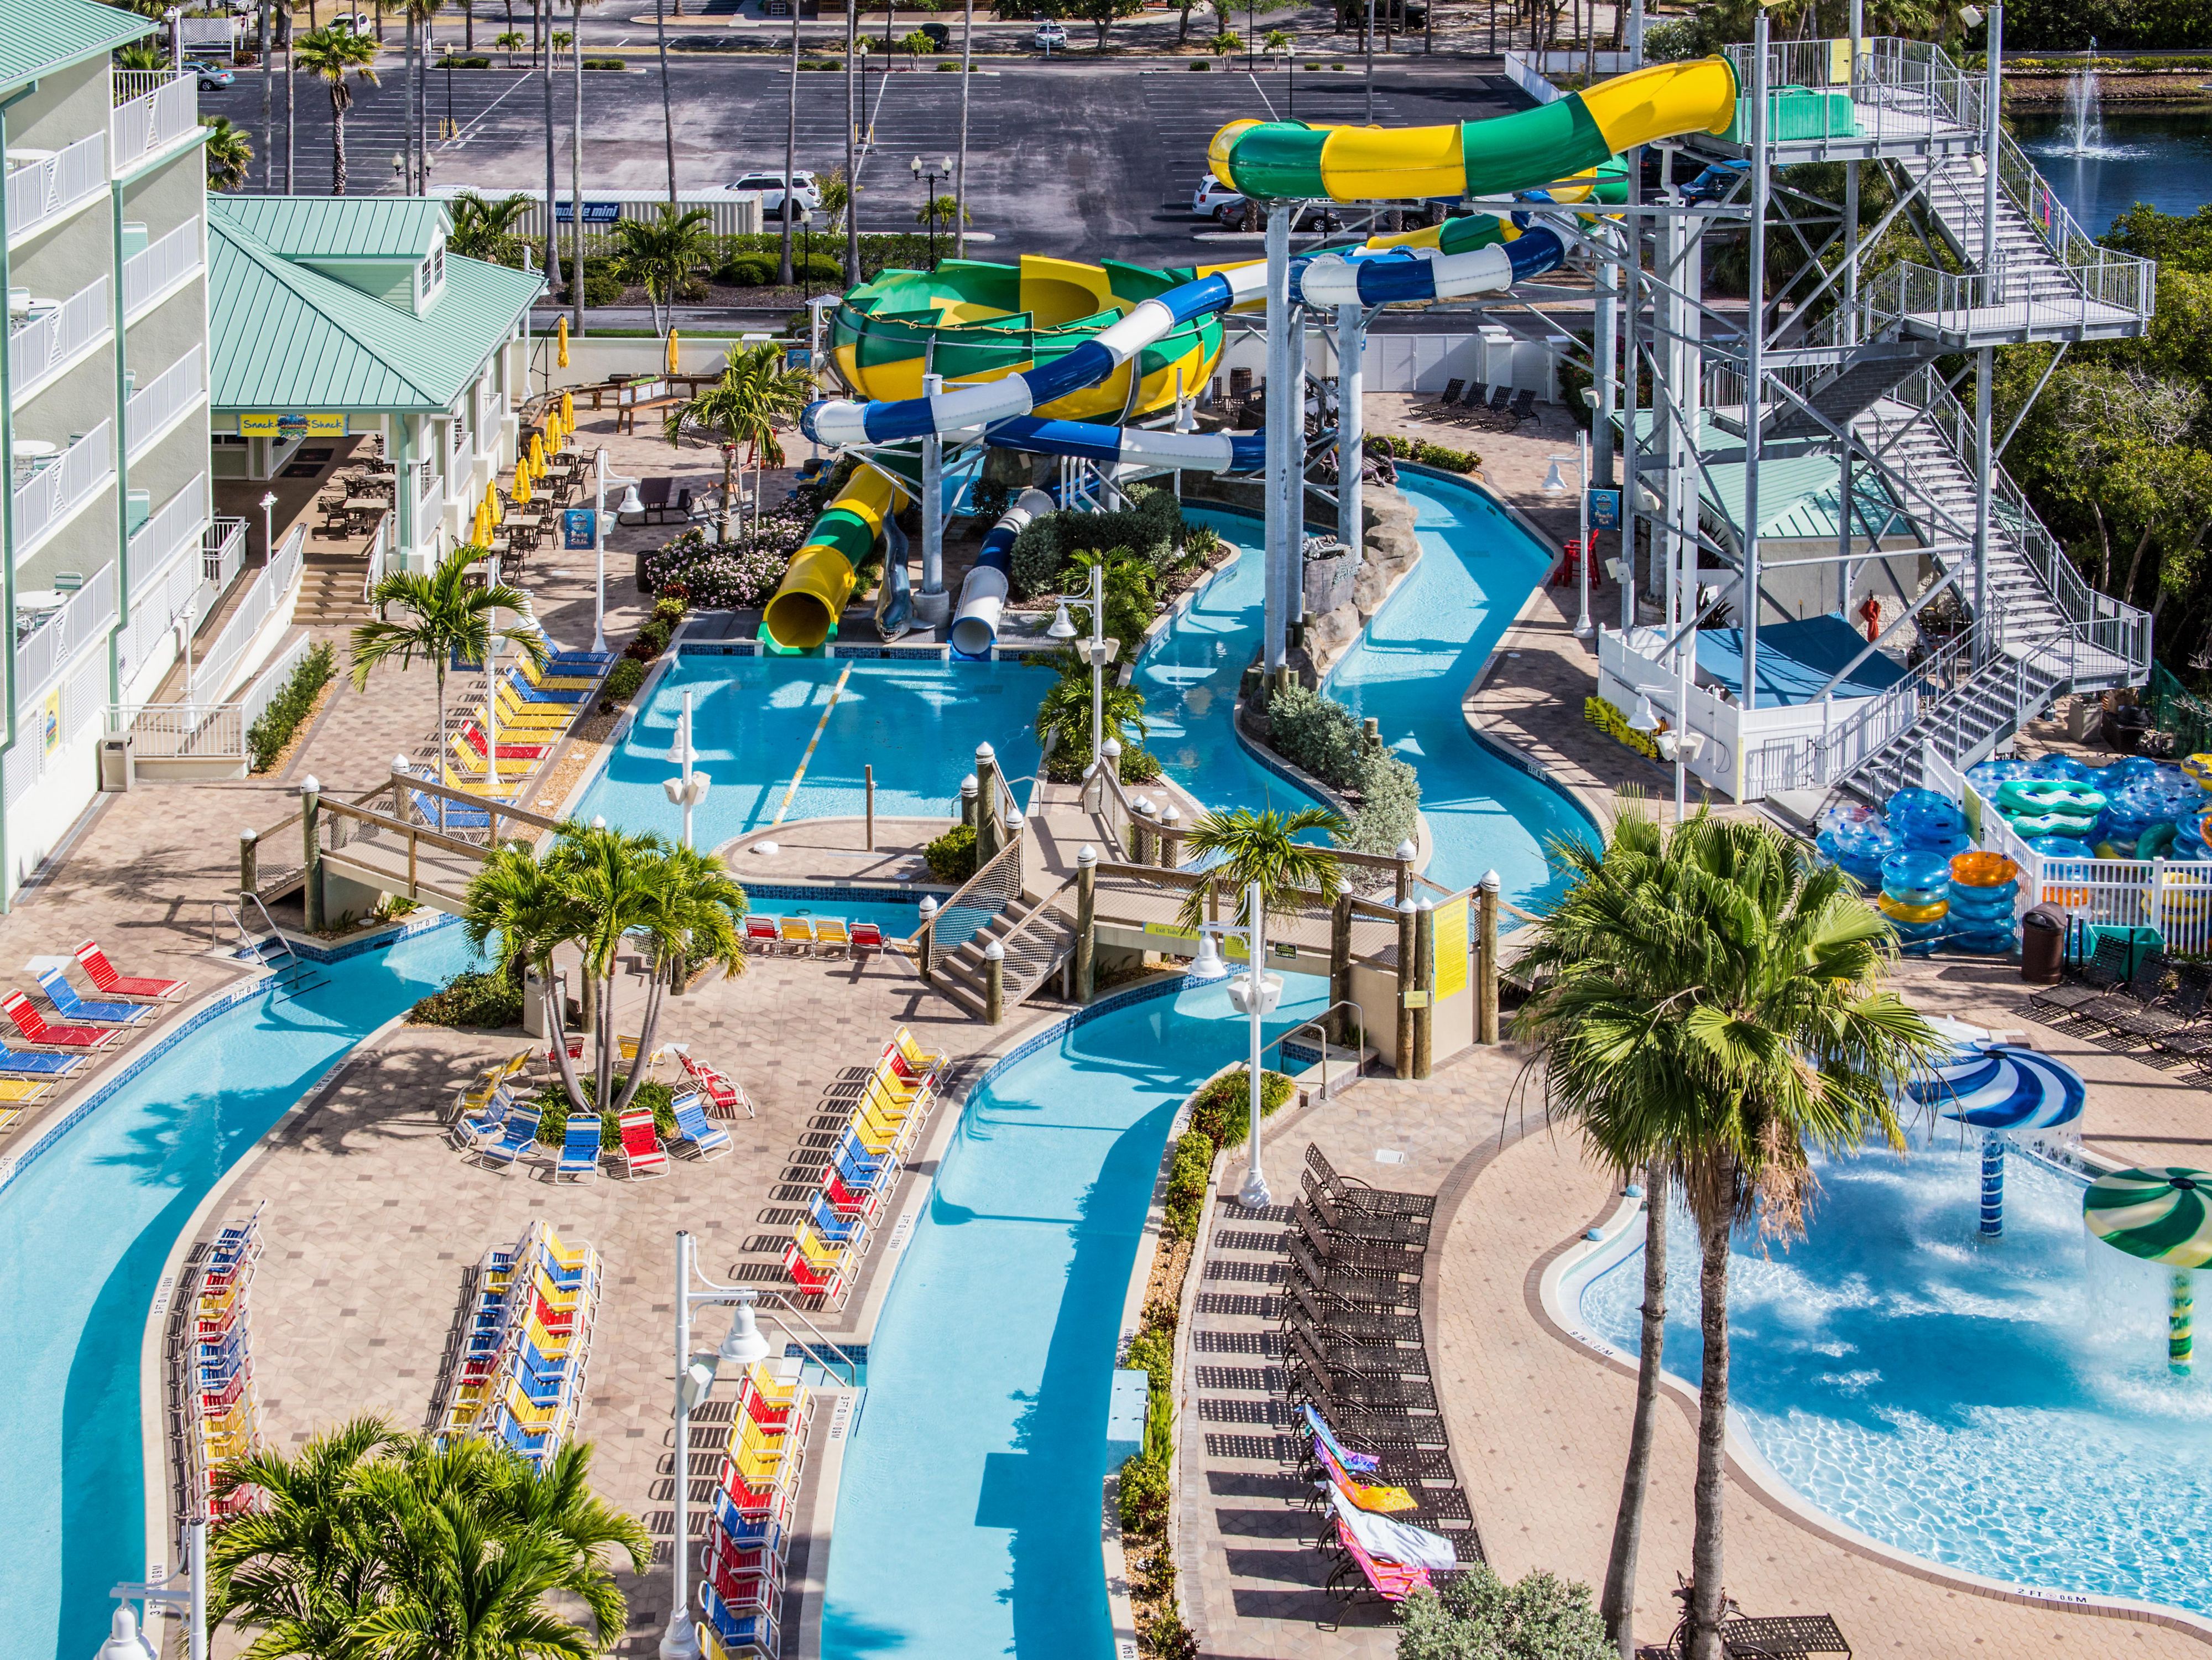 Add adventure to your stay and take advantage of discounted tickets to Splash Harbour Water Park. Rip down one of the two 42 ft. waterslides, relax in the 600 ft. lazy river or chill in the 3,000 sq. ft. zero-entry pool. Hotel guests can purchase discounted tickets for $16.95 for over 48" and $14.95 under 48" or book one of our water park packages.